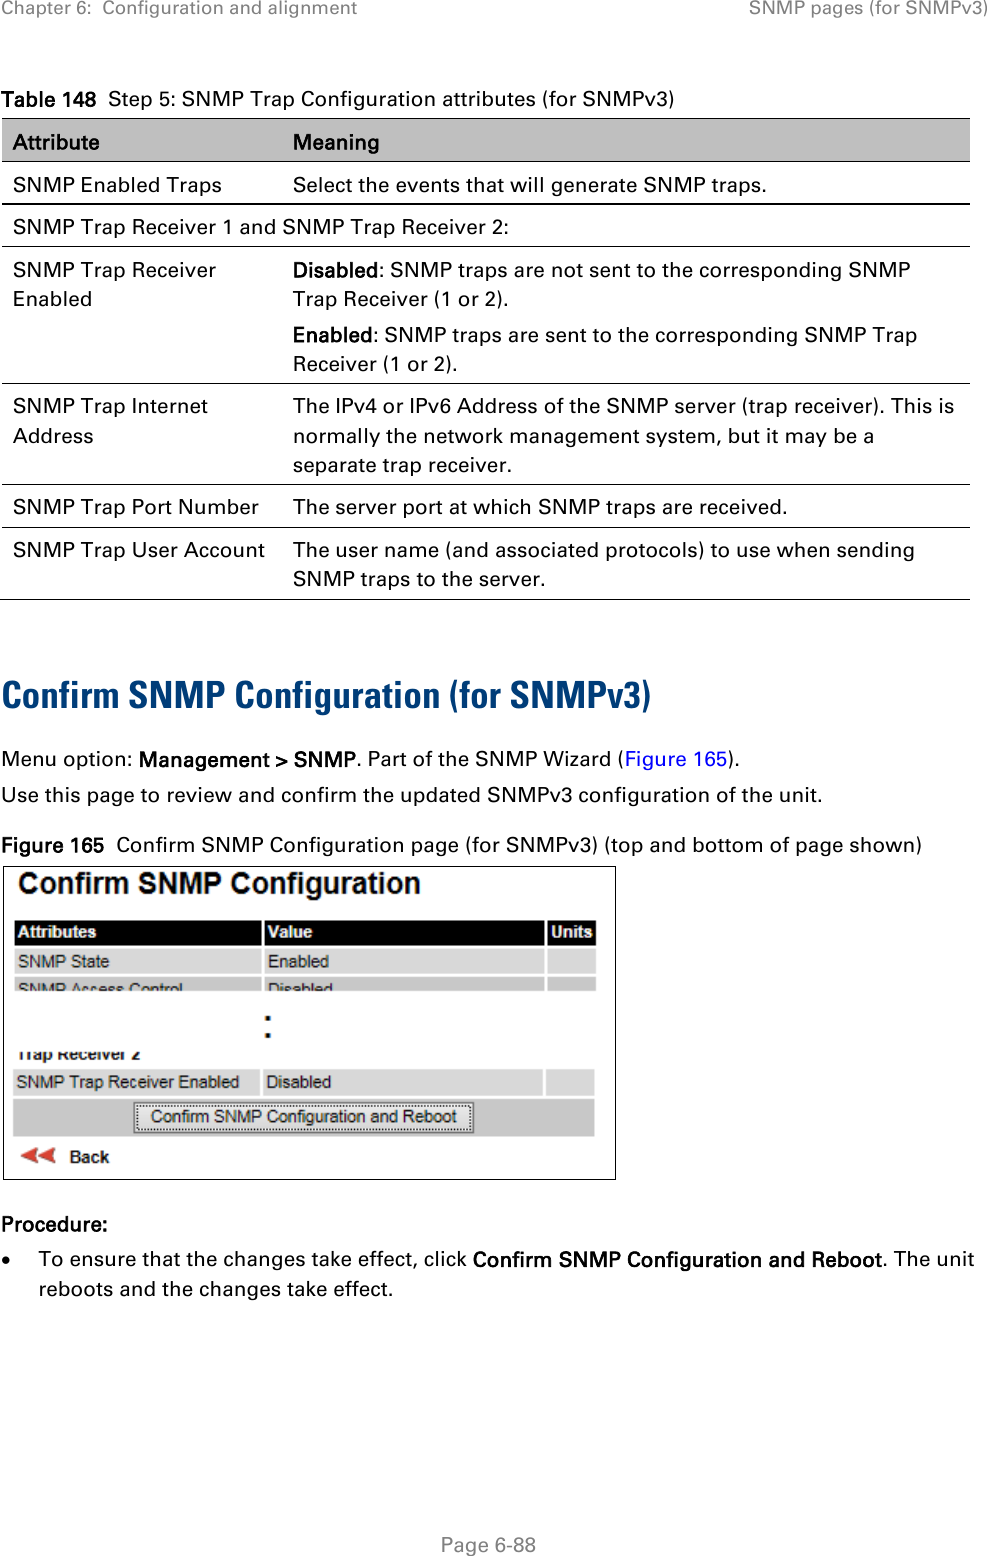 Chapter 6:  Configuration and alignment SNMP pages (for SNMPv3)  Table 148  Step 5: SNMP Trap Configuration attributes (for SNMPv3) Attribute Meaning SNMP Enabled Traps Select the events that will generate SNMP traps. SNMP Trap Receiver 1 and SNMP Trap Receiver 2: SNMP Trap Receiver Enabled Disabled: SNMP traps are not sent to the corresponding SNMP Trap Receiver (1 or 2). Enabled: SNMP traps are sent to the corresponding SNMP Trap Receiver (1 or 2). SNMP Trap Internet Address The IPv4 or IPv6 Address of the SNMP server (trap receiver). This is normally the network management system, but it may be a separate trap receiver. SNMP Trap Port Number The server port at which SNMP traps are received. SNMP Trap User Account The user name (and associated protocols) to use when sending SNMP traps to the server.  Confirm SNMP Configuration (for SNMPv3)  Menu option: Management &gt; SNMP. Part of the SNMP Wizard (Figure 165). Use this page to review and confirm the updated SNMPv3 configuration of the unit. Figure 165  Confirm SNMP Configuration page (for SNMPv3) (top and bottom of page shown)  Procedure: • To ensure that the changes take effect, click Confirm SNMP Configuration and Reboot. The unit reboots and the changes take effect.  Page 6-88 